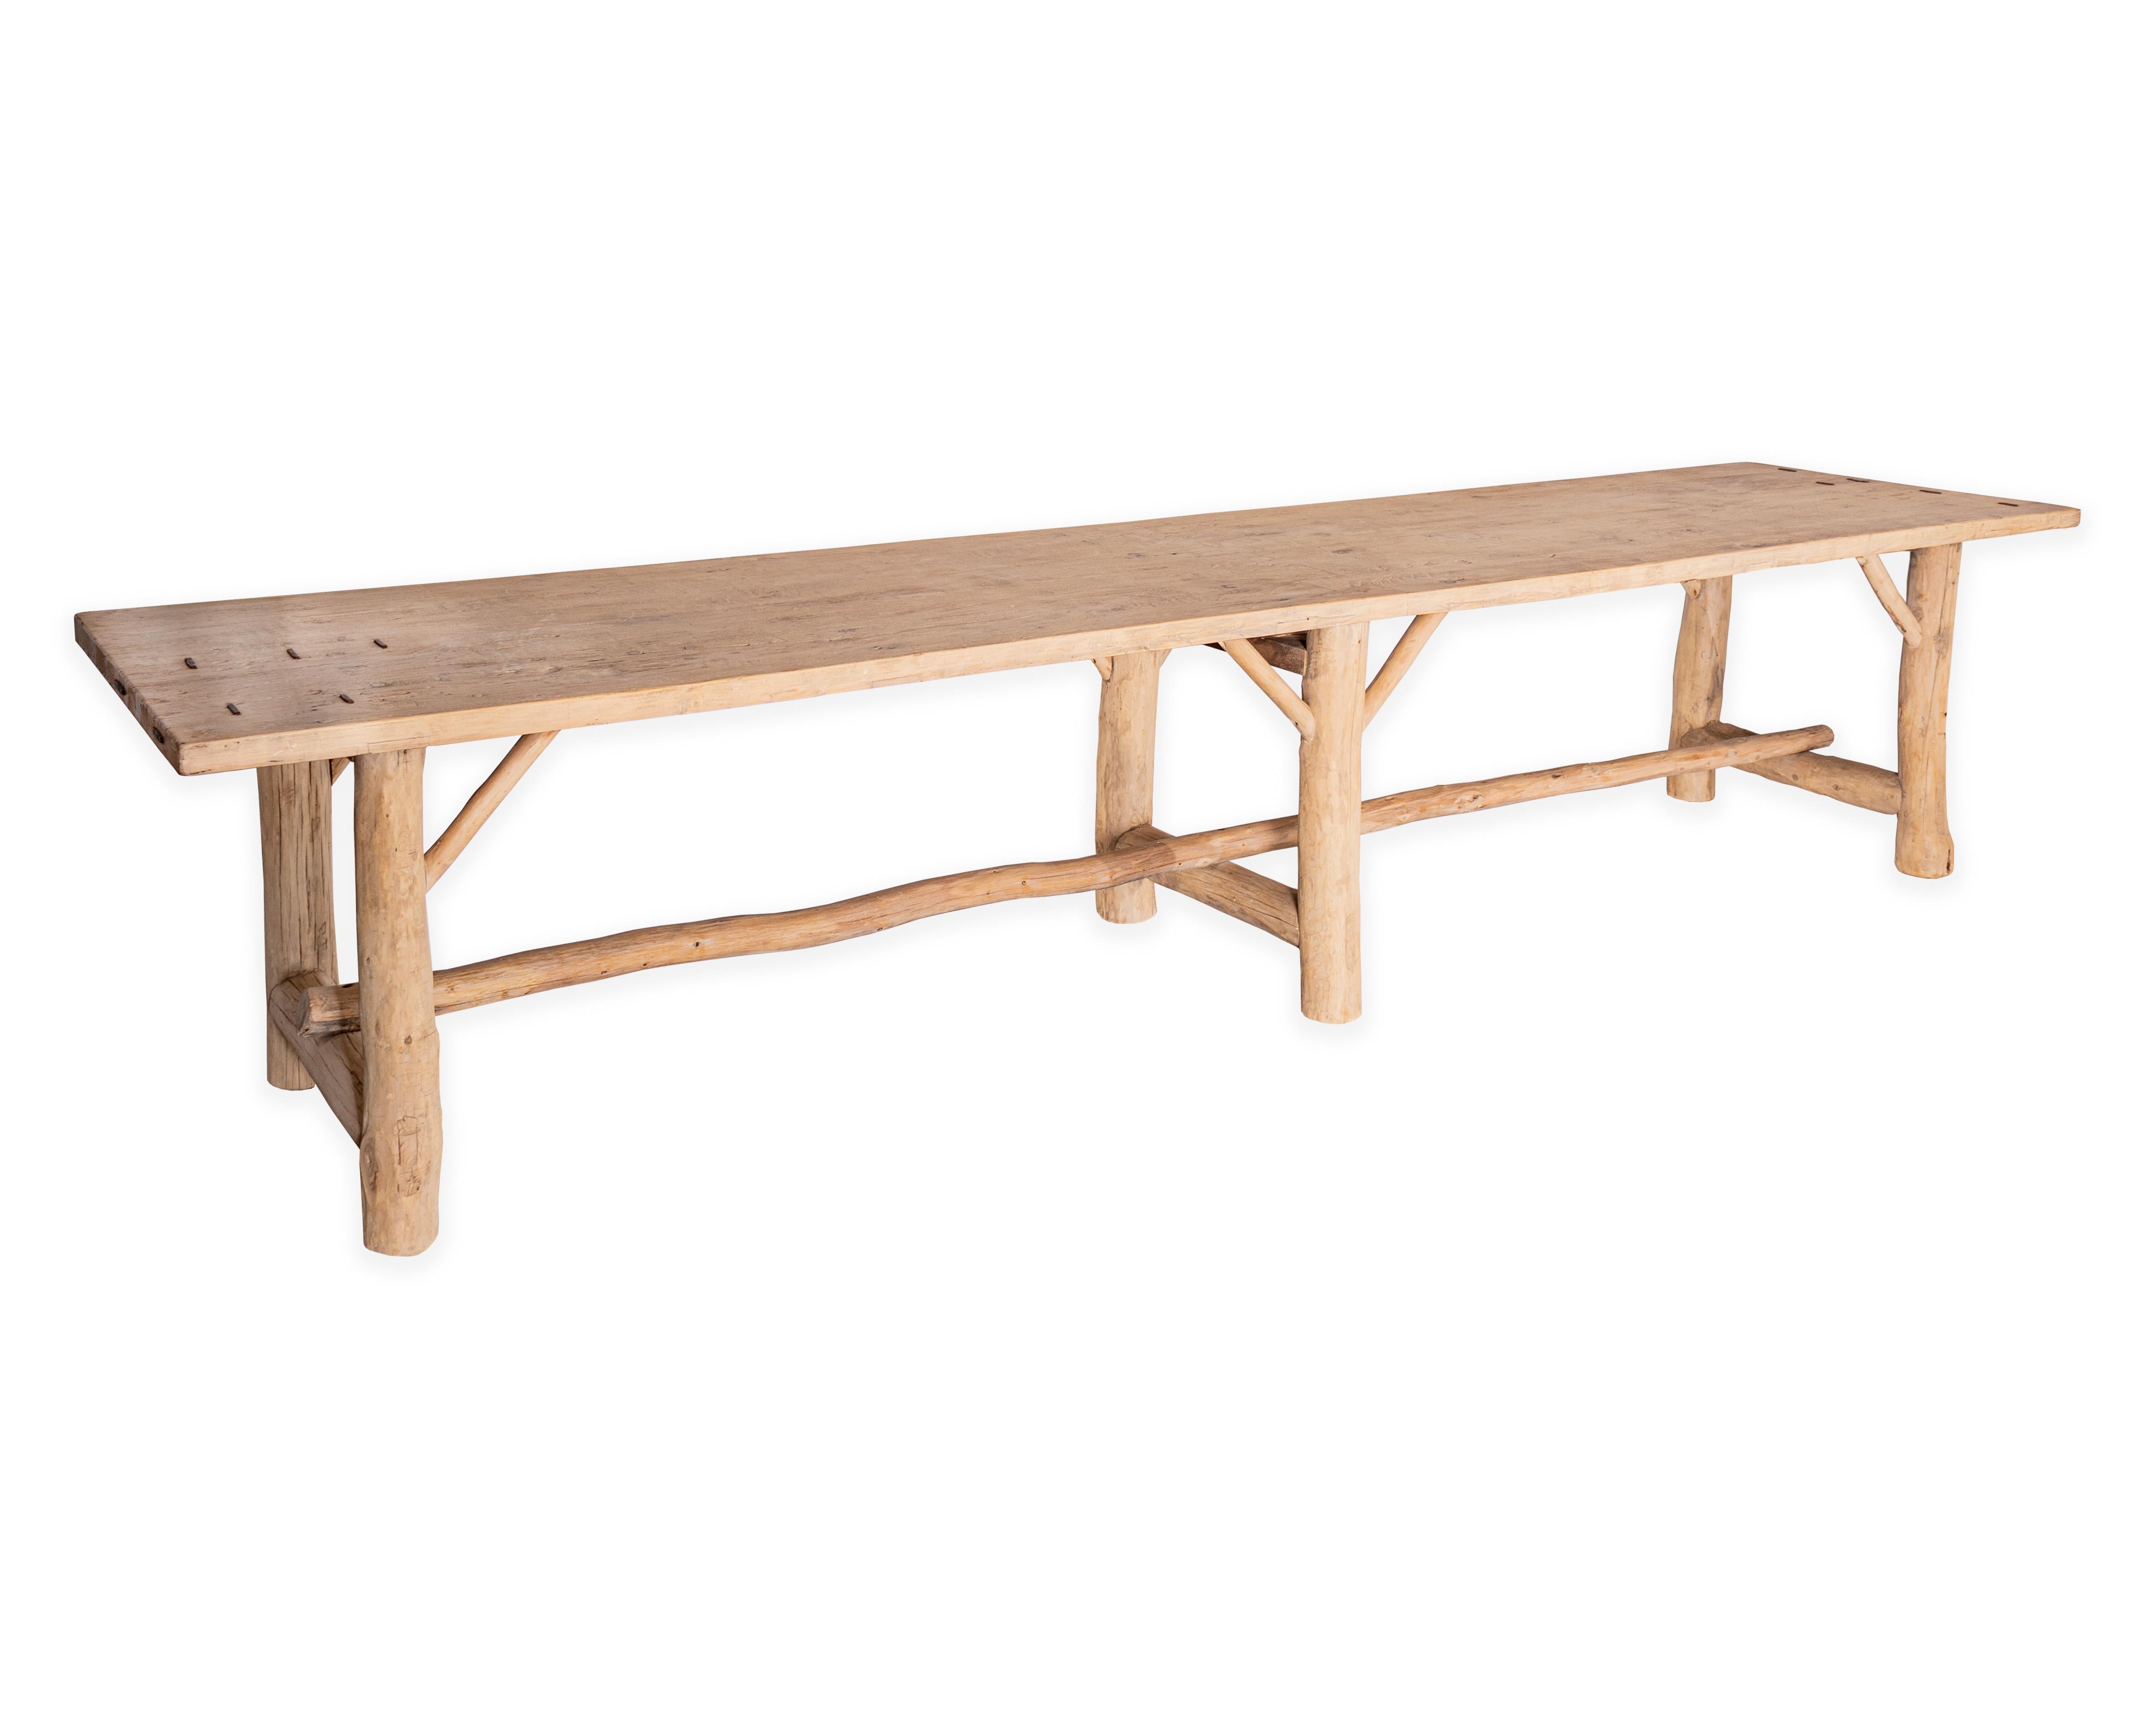 Limb and trunk motif dining table, reclaimed elm with decorative metal accents. 

Piece from the Le Monde collection. Exclusive to Brendan Bass.
    